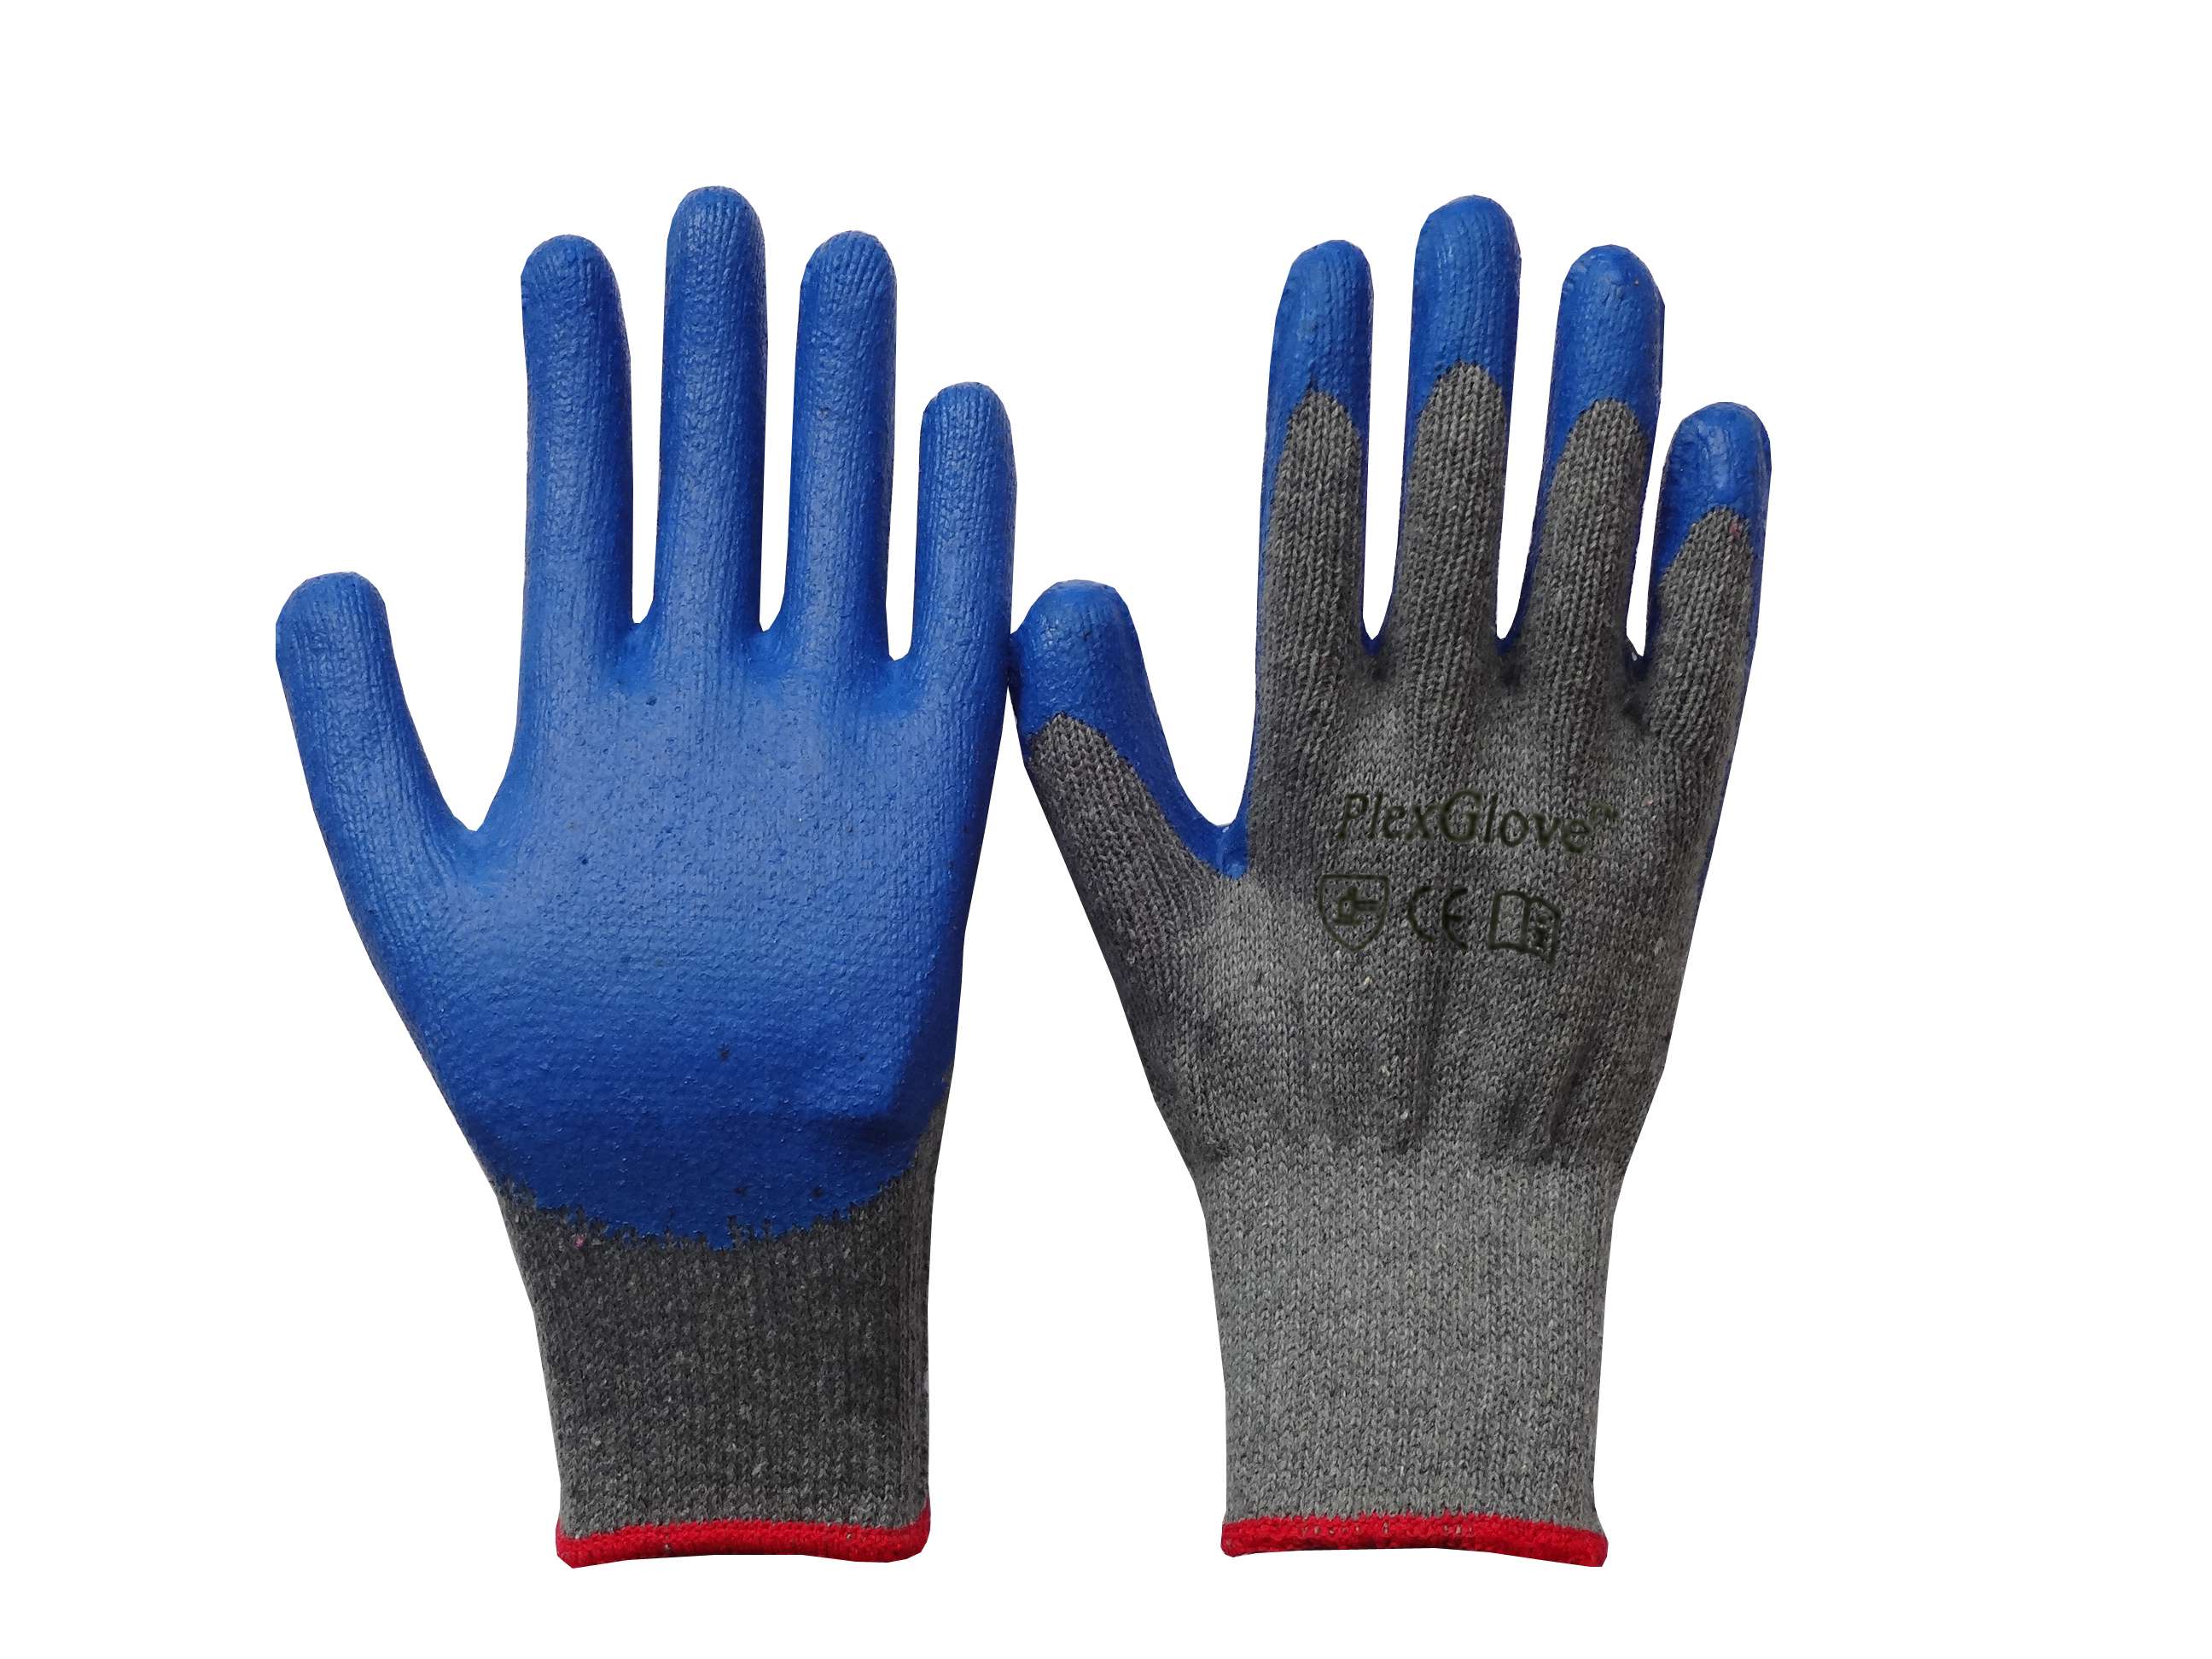 Large Gray Cotton String Knit Work Gloves with Blue Latex Dipped Palm, 144 Pairs/Case - 1